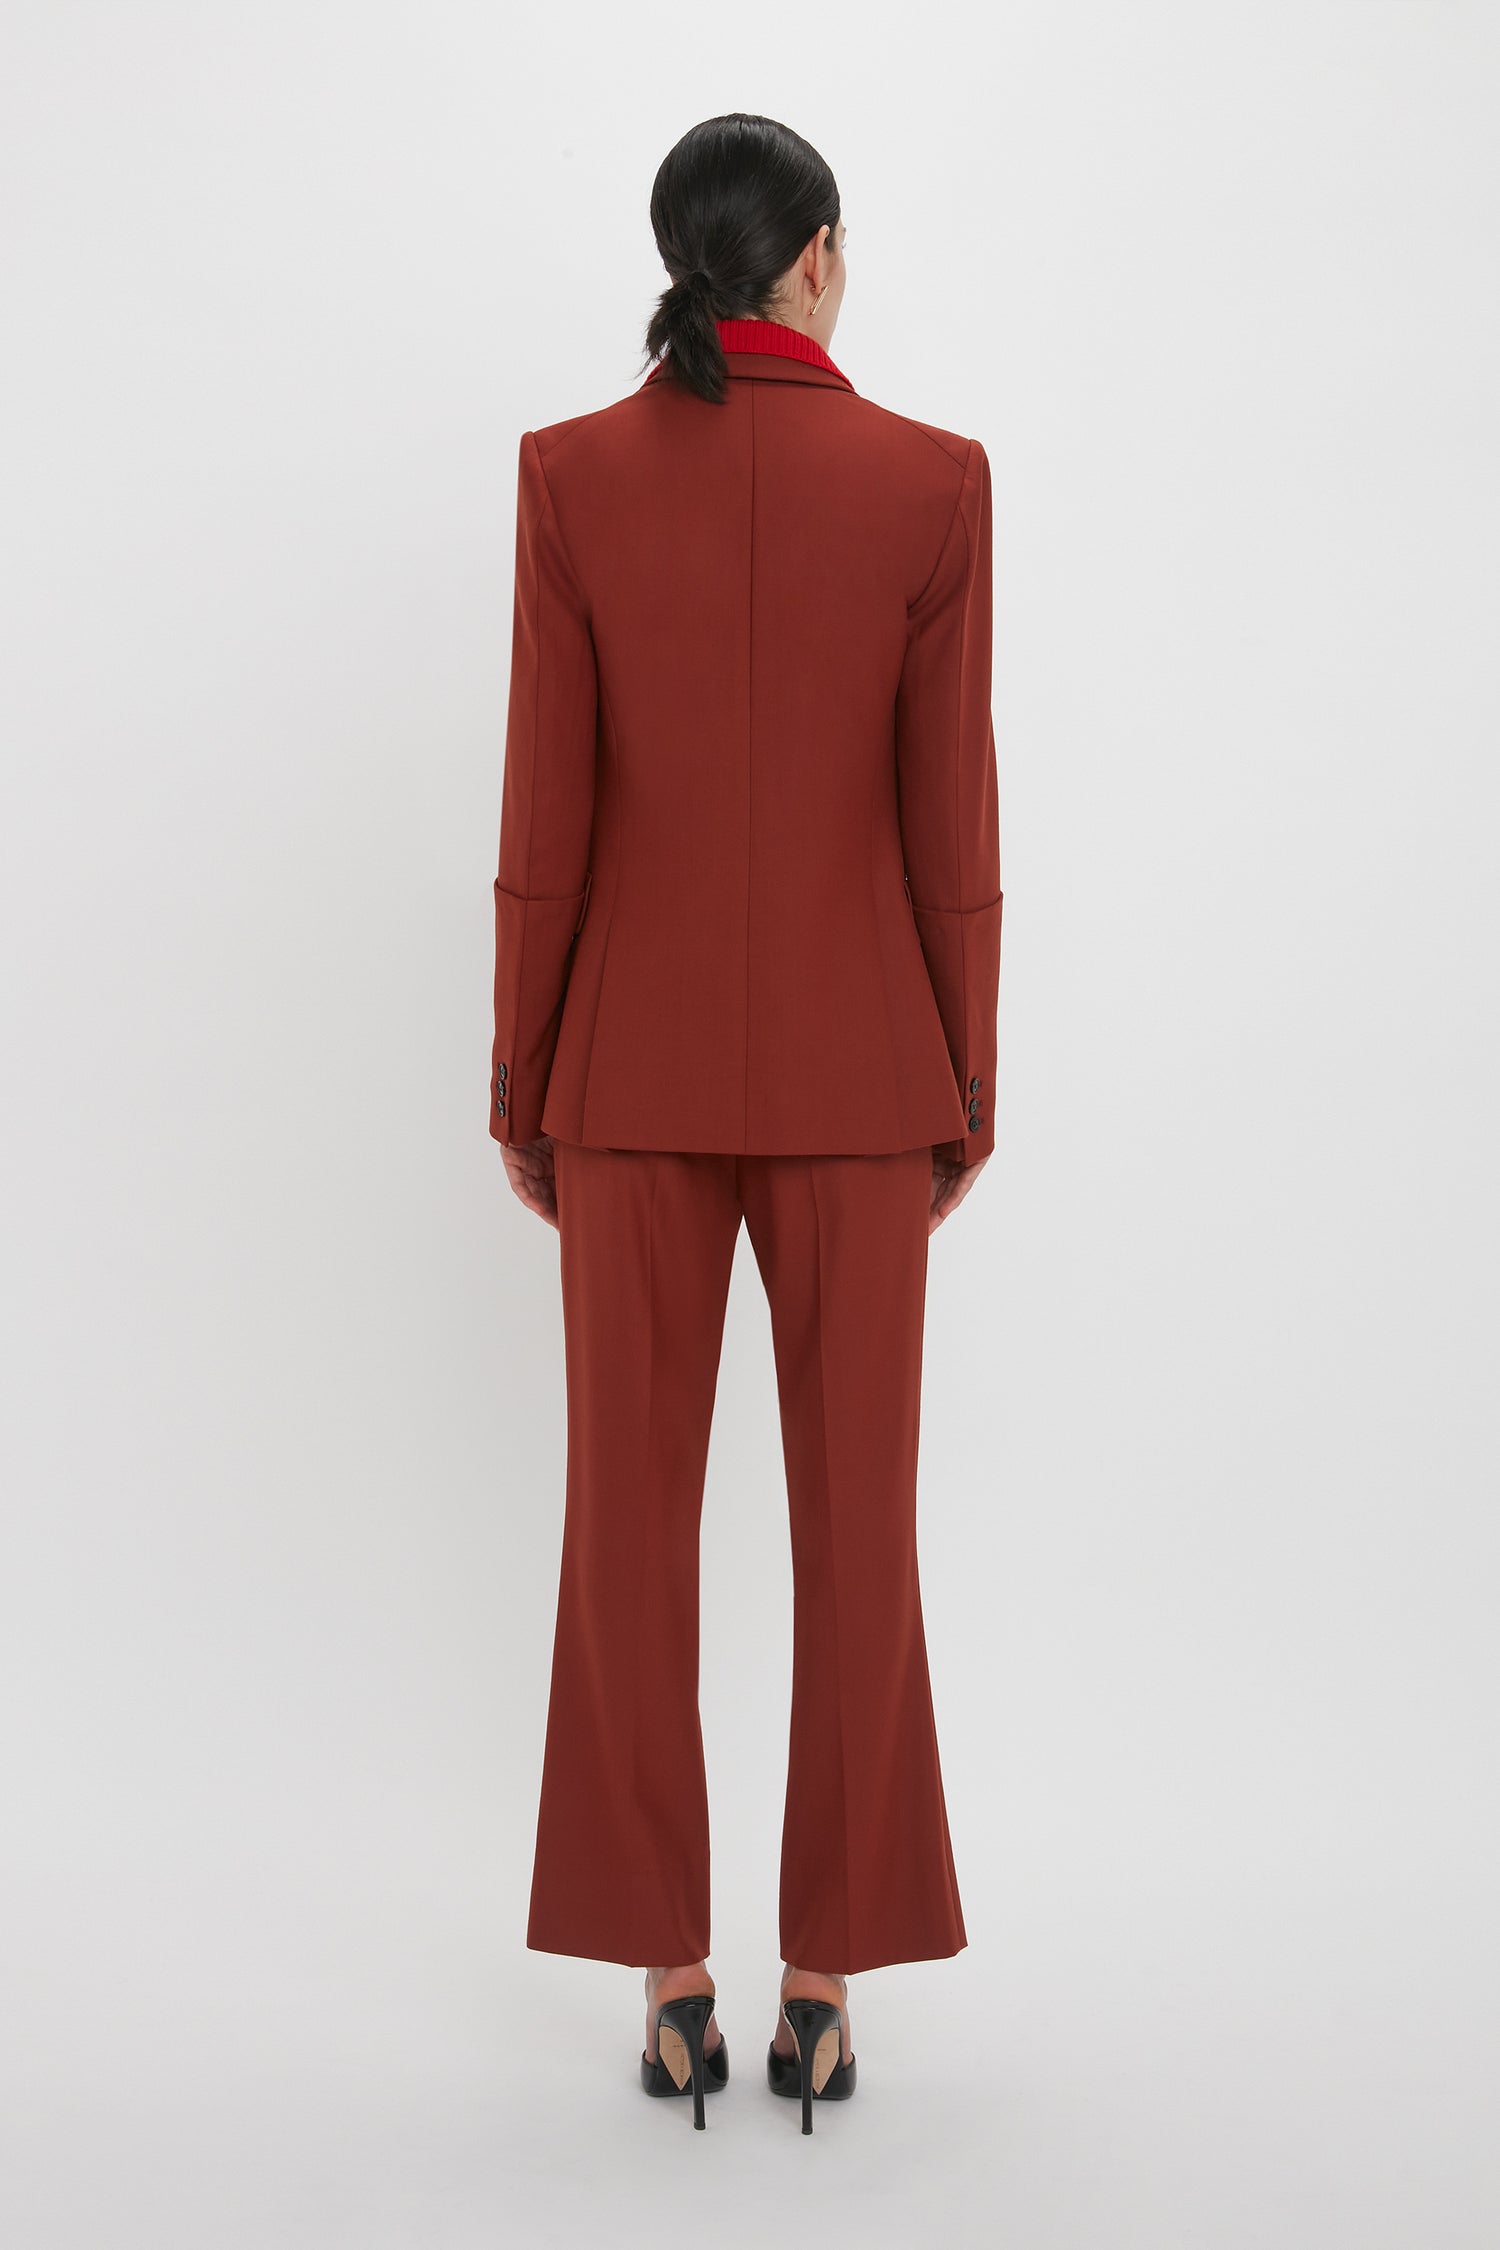 A person with dark hair in a low ponytail is wearing a red **Victoria Beckham Sleeve Detail Patch Pocket Jacket In Russet** and black high heels, standing with their back to the camera against a plain white background.